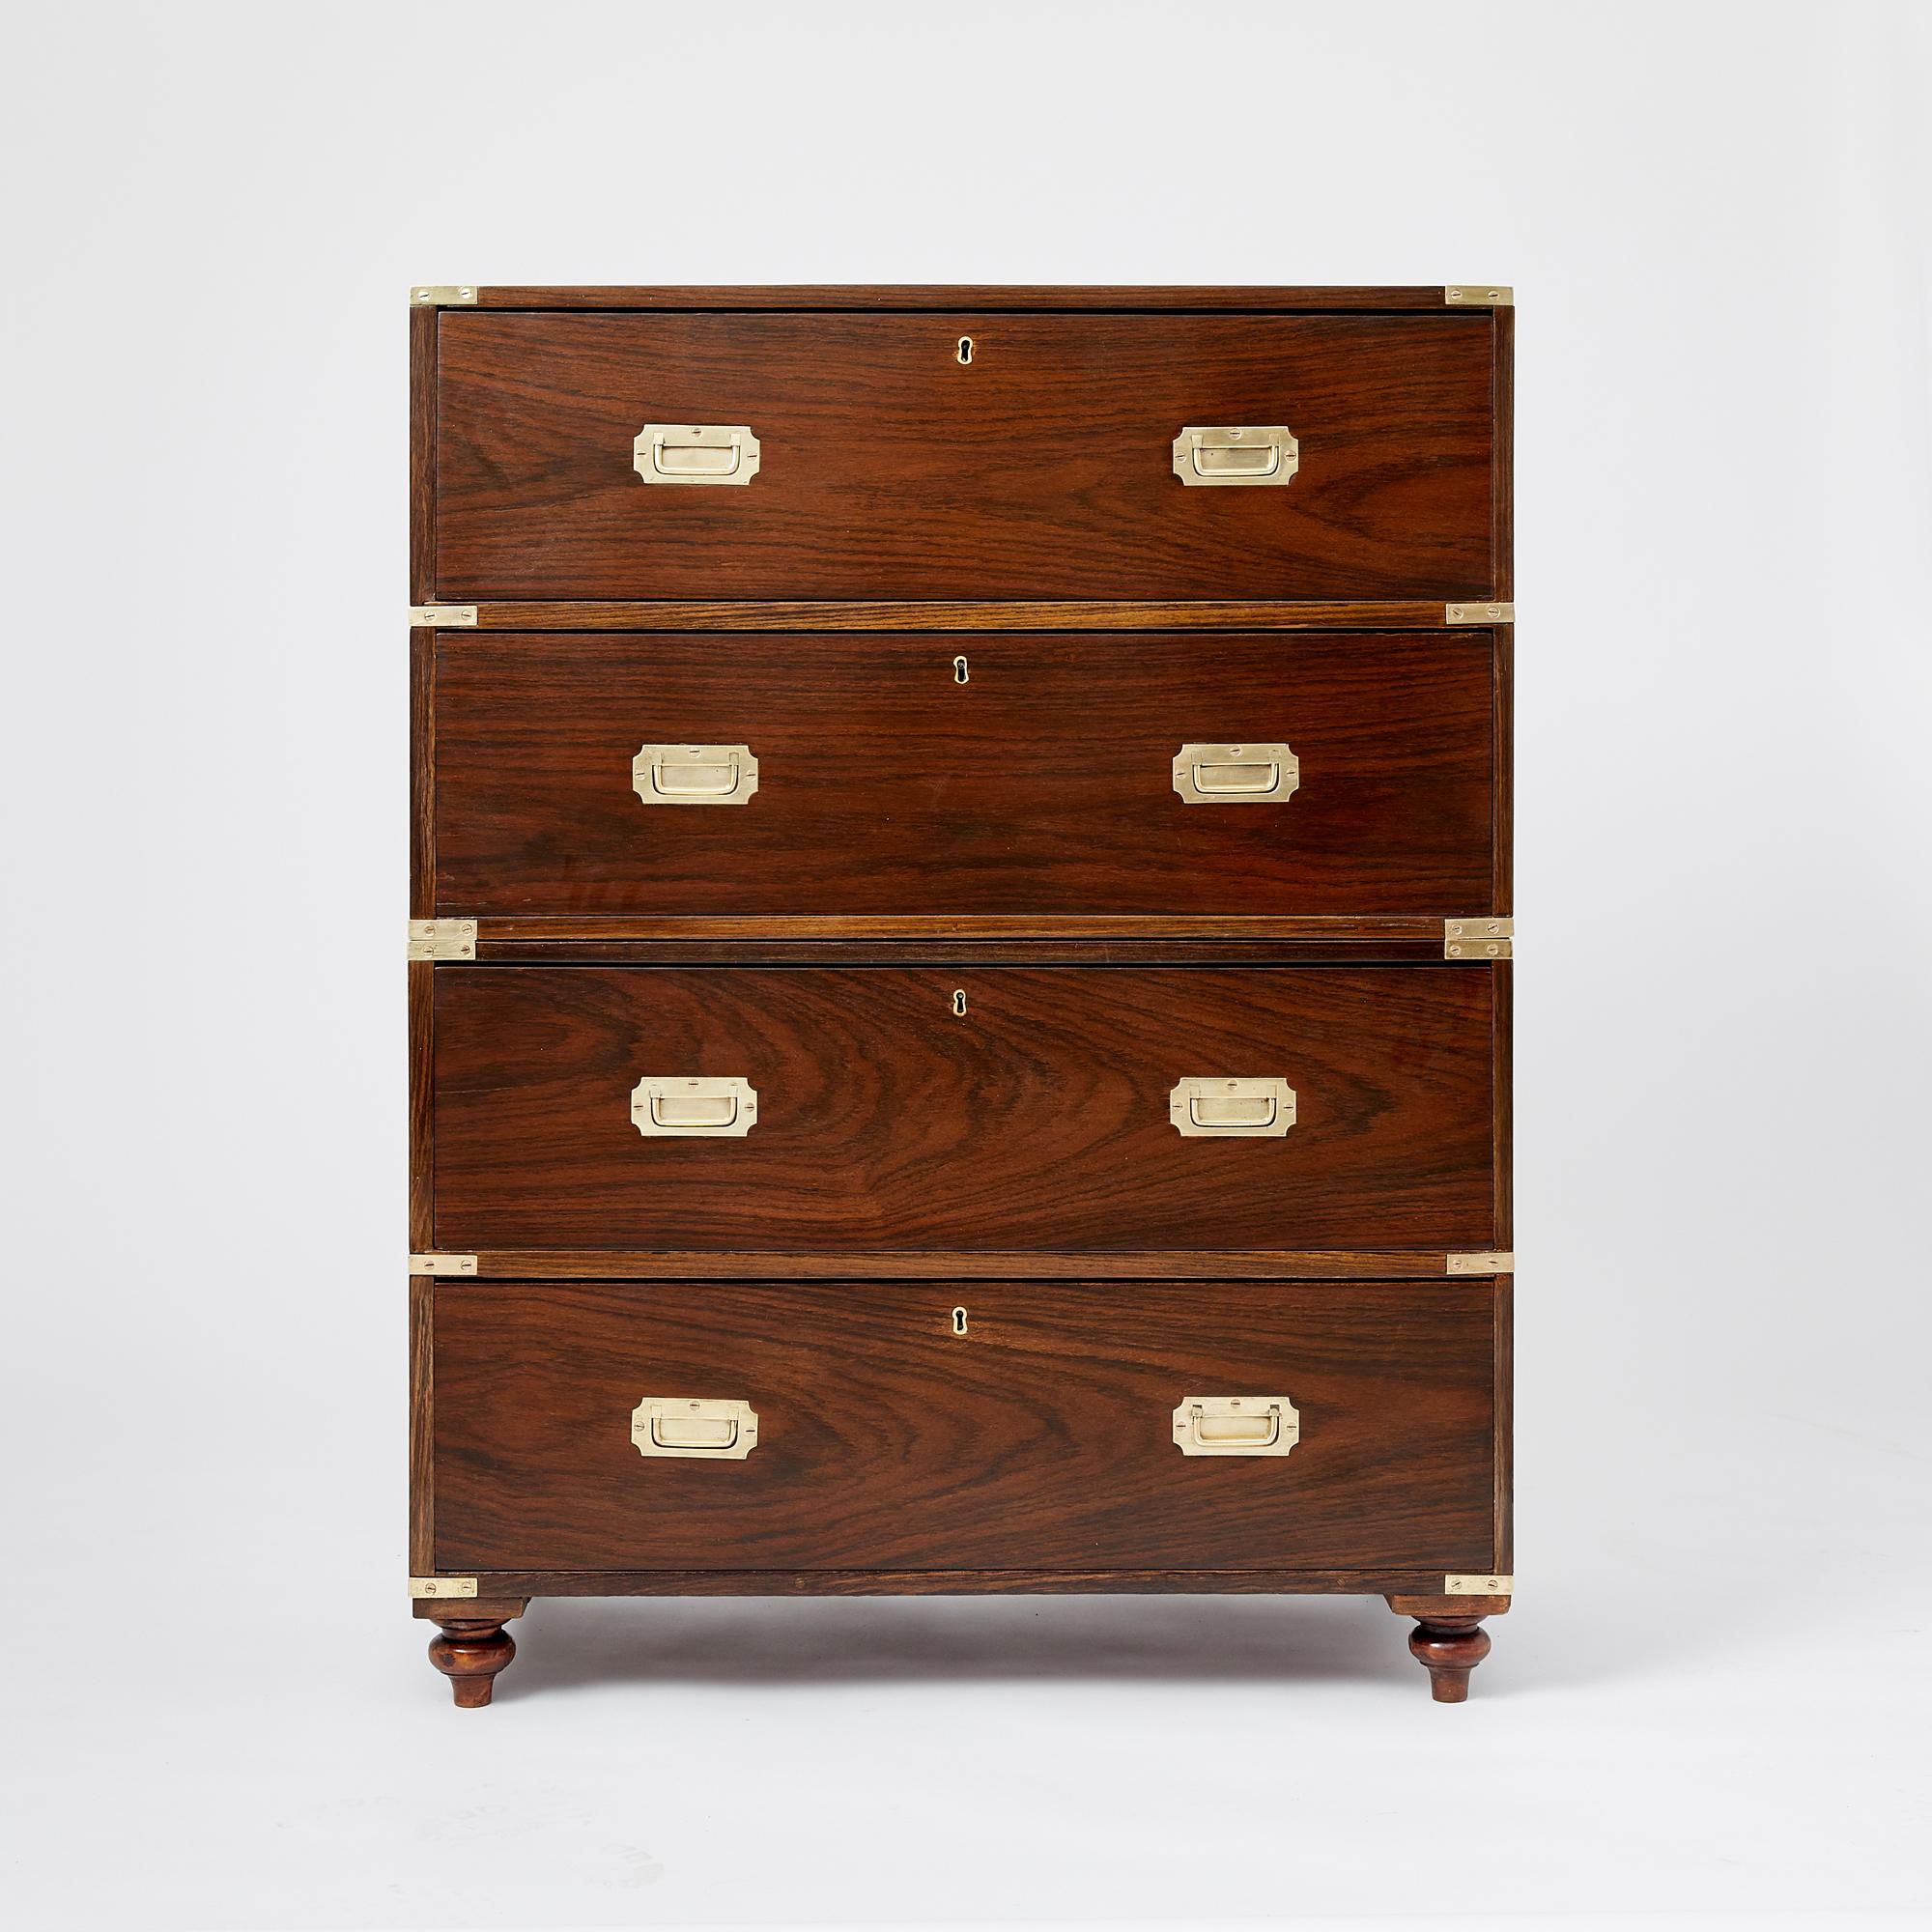 A two-part rosewood Anglo Indian campaign chest. Each section fitted with recessed brass handles on each side and protective brass corner mounts. Each drawer front with two recessed pulls. The base supported by turned rosewood legs. This piece is